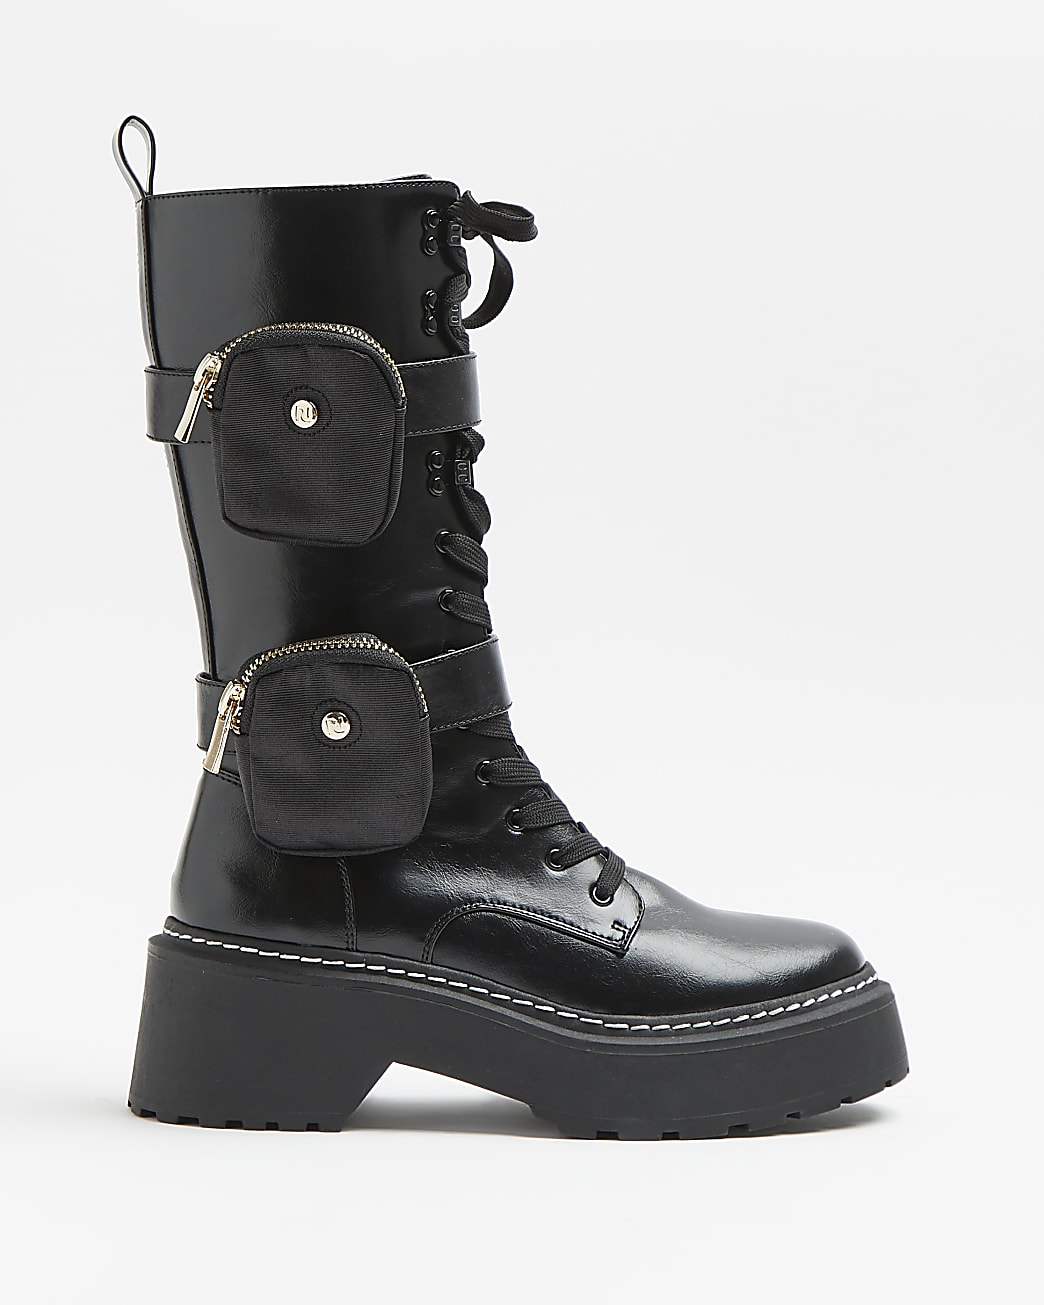 Black utility knee high boots